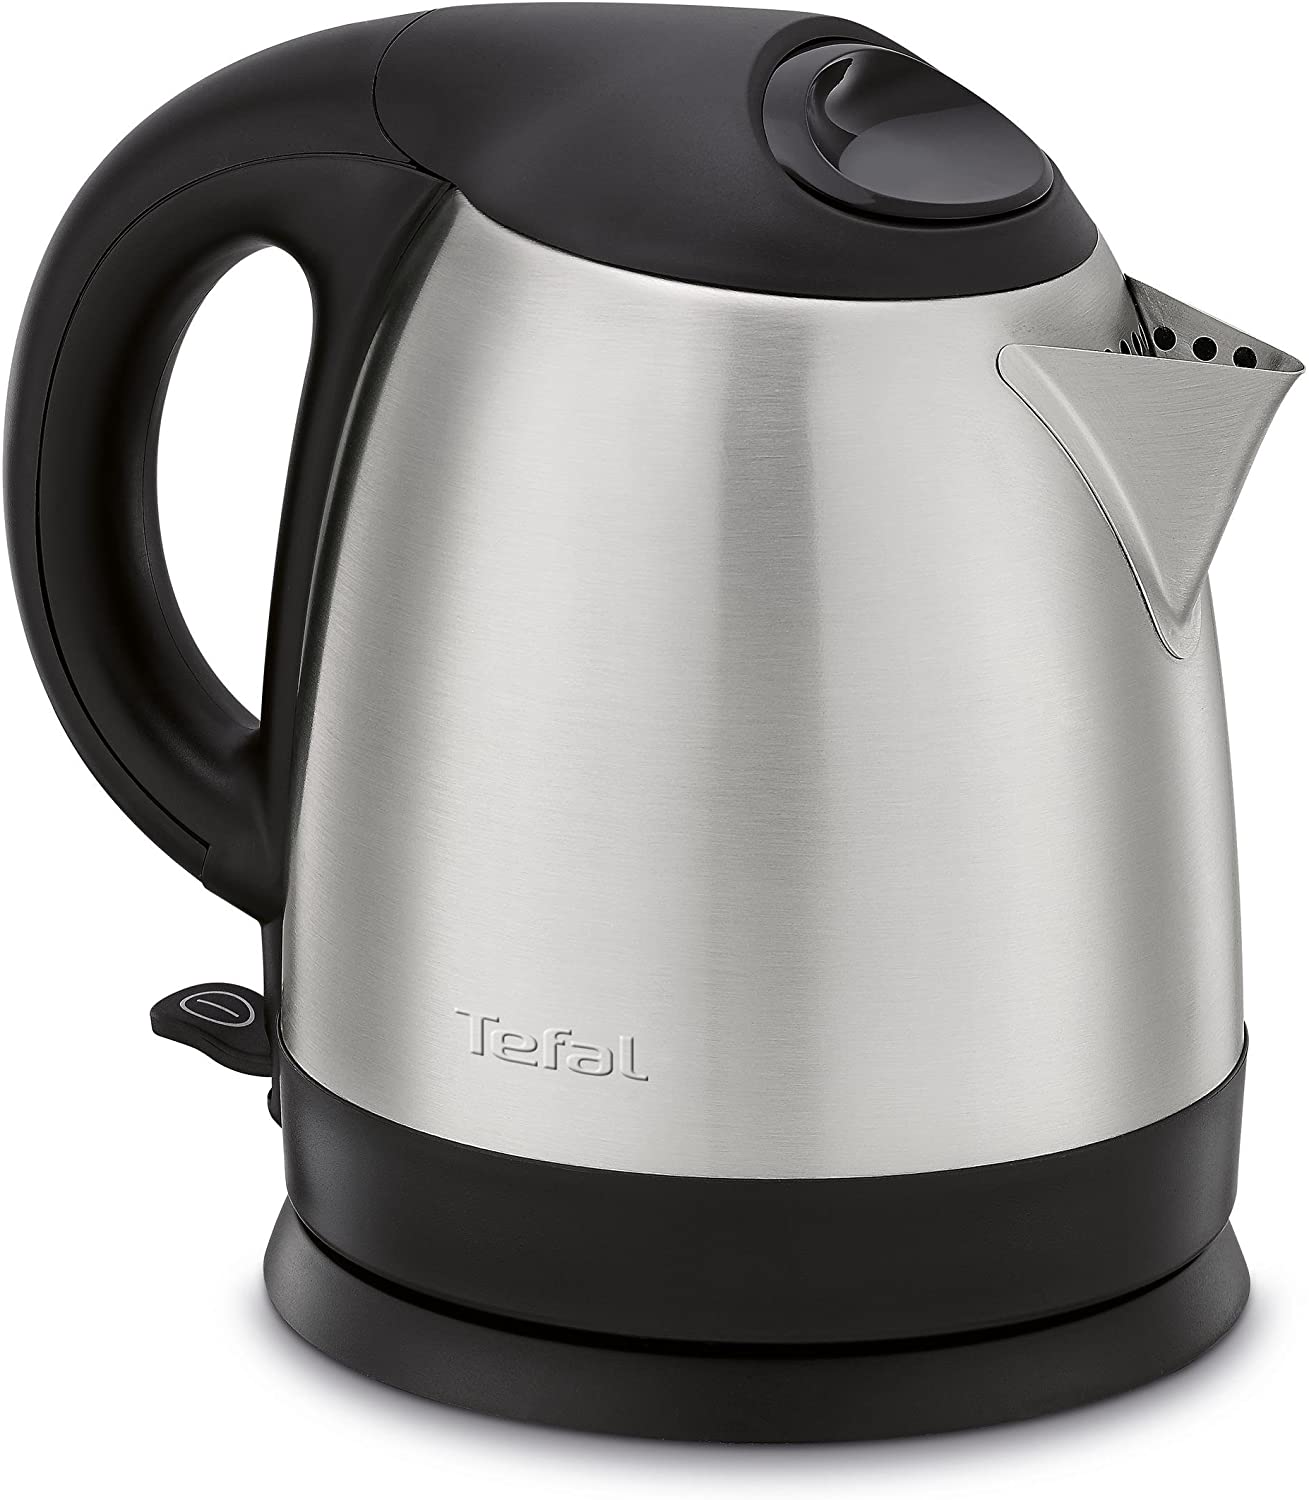 Tefal Compact Stainless Steel KI431D10 Water Maker 1.2 Litre